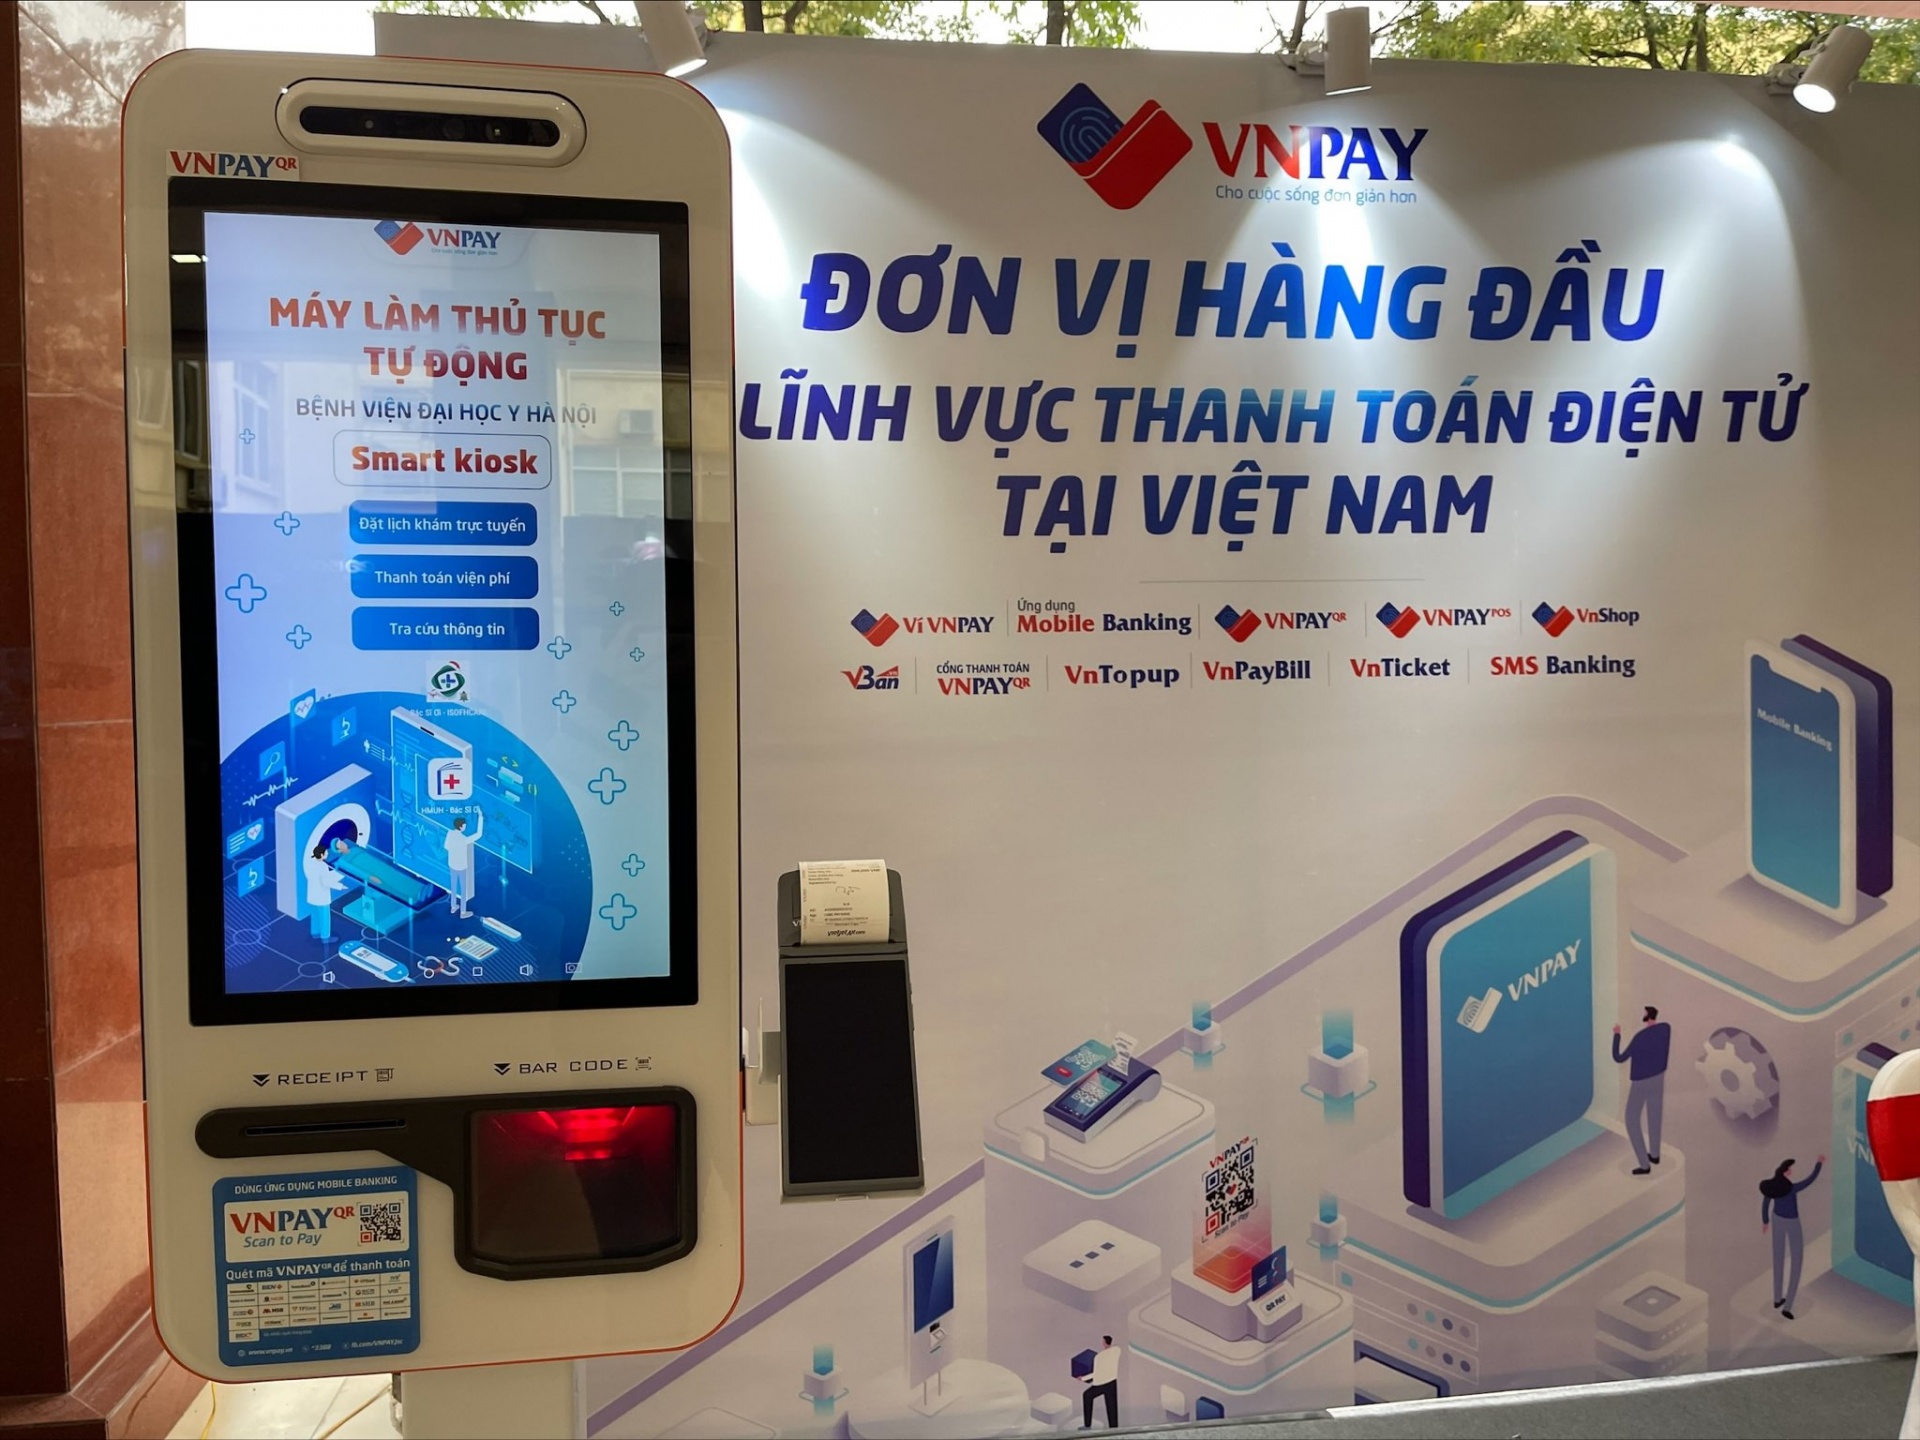 VNPAY promotes digital payments in healthcare sector